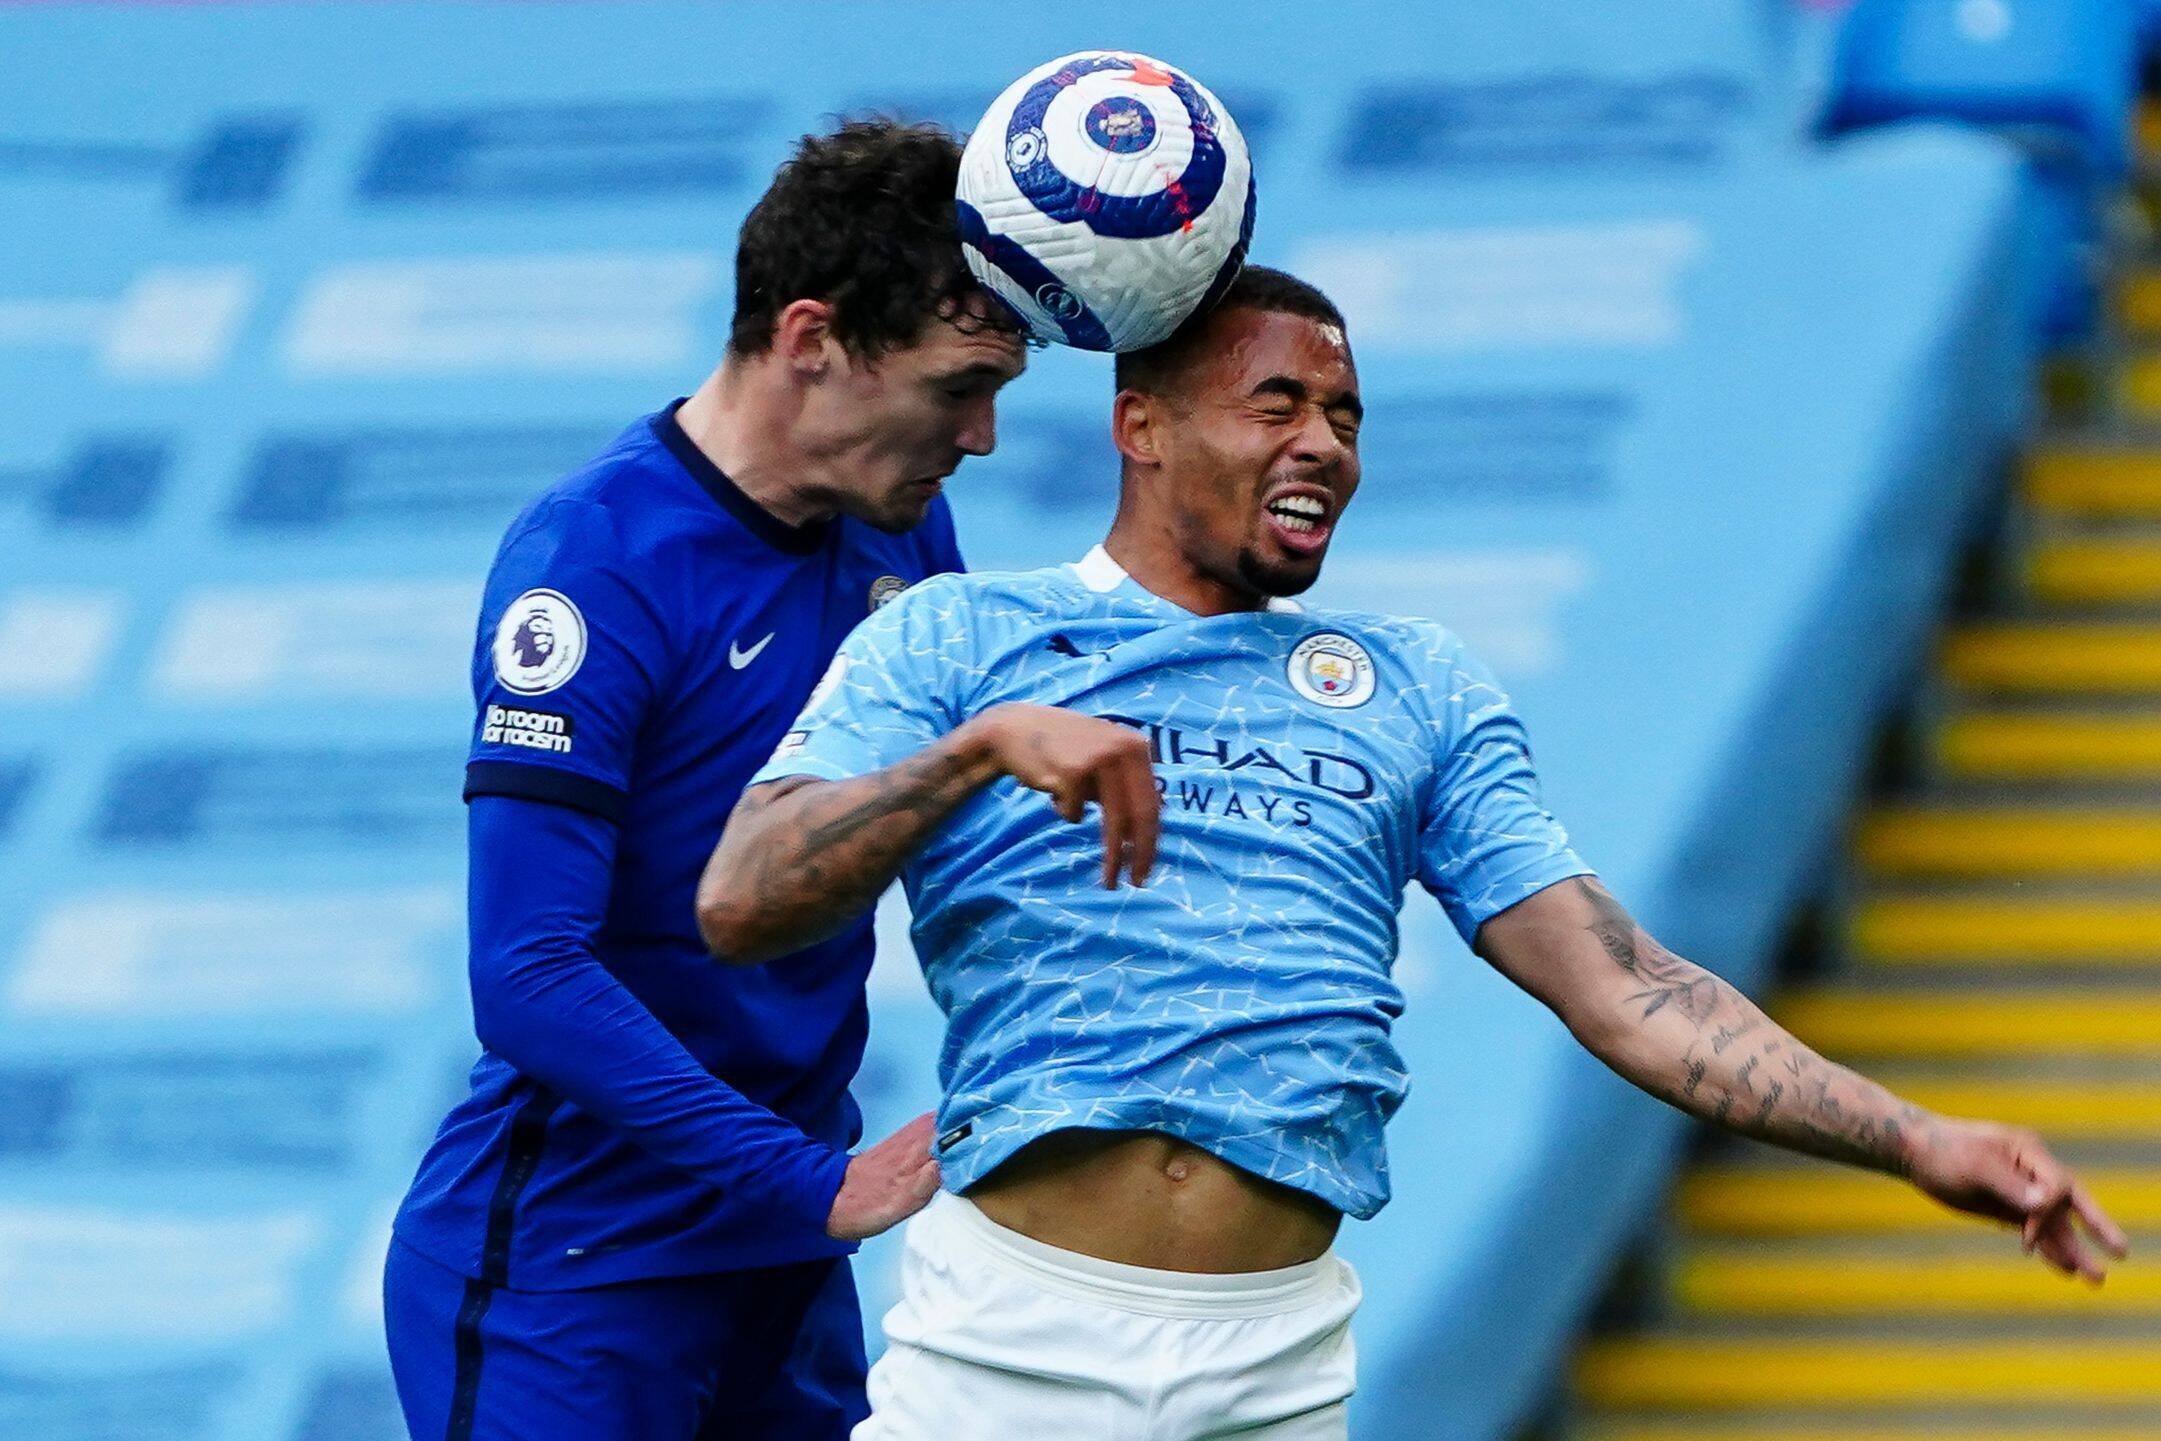 Mandatory Credit: Photo By Javier Garcia/bpi/shutterstock (11893130ad) Andreas Christensen Of Chelsea And Gabriel Jesus